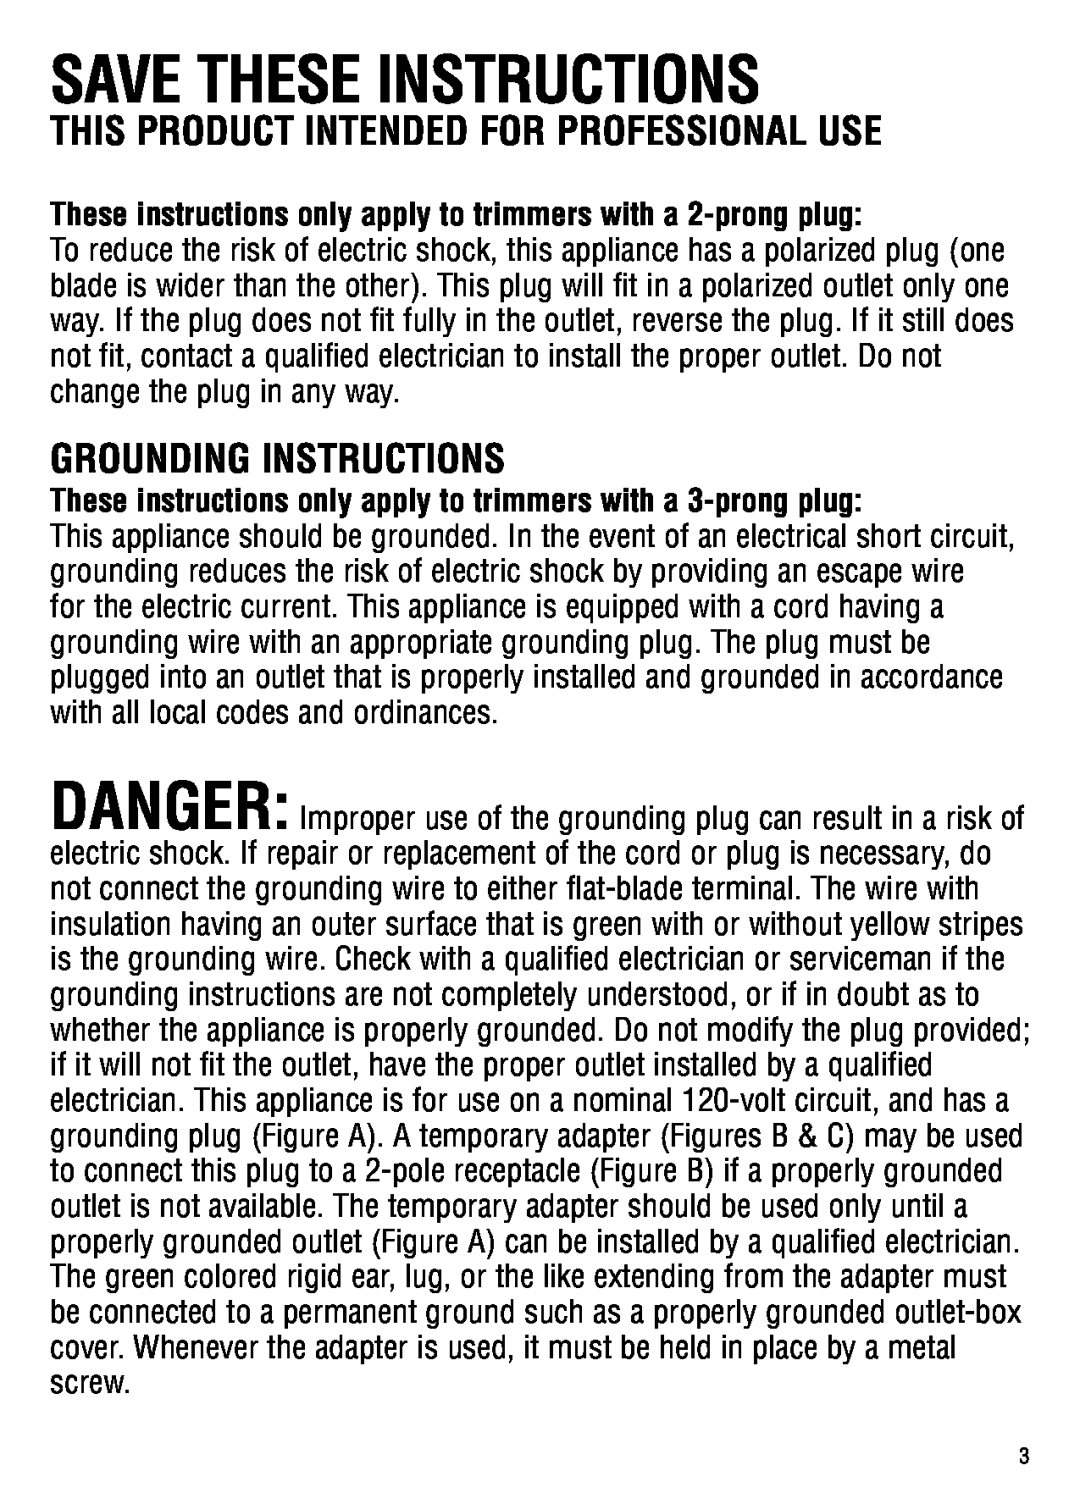 Andis Company gto, go manual save these instructions, This Product Intended For Professional Use, Grounding Instructions 